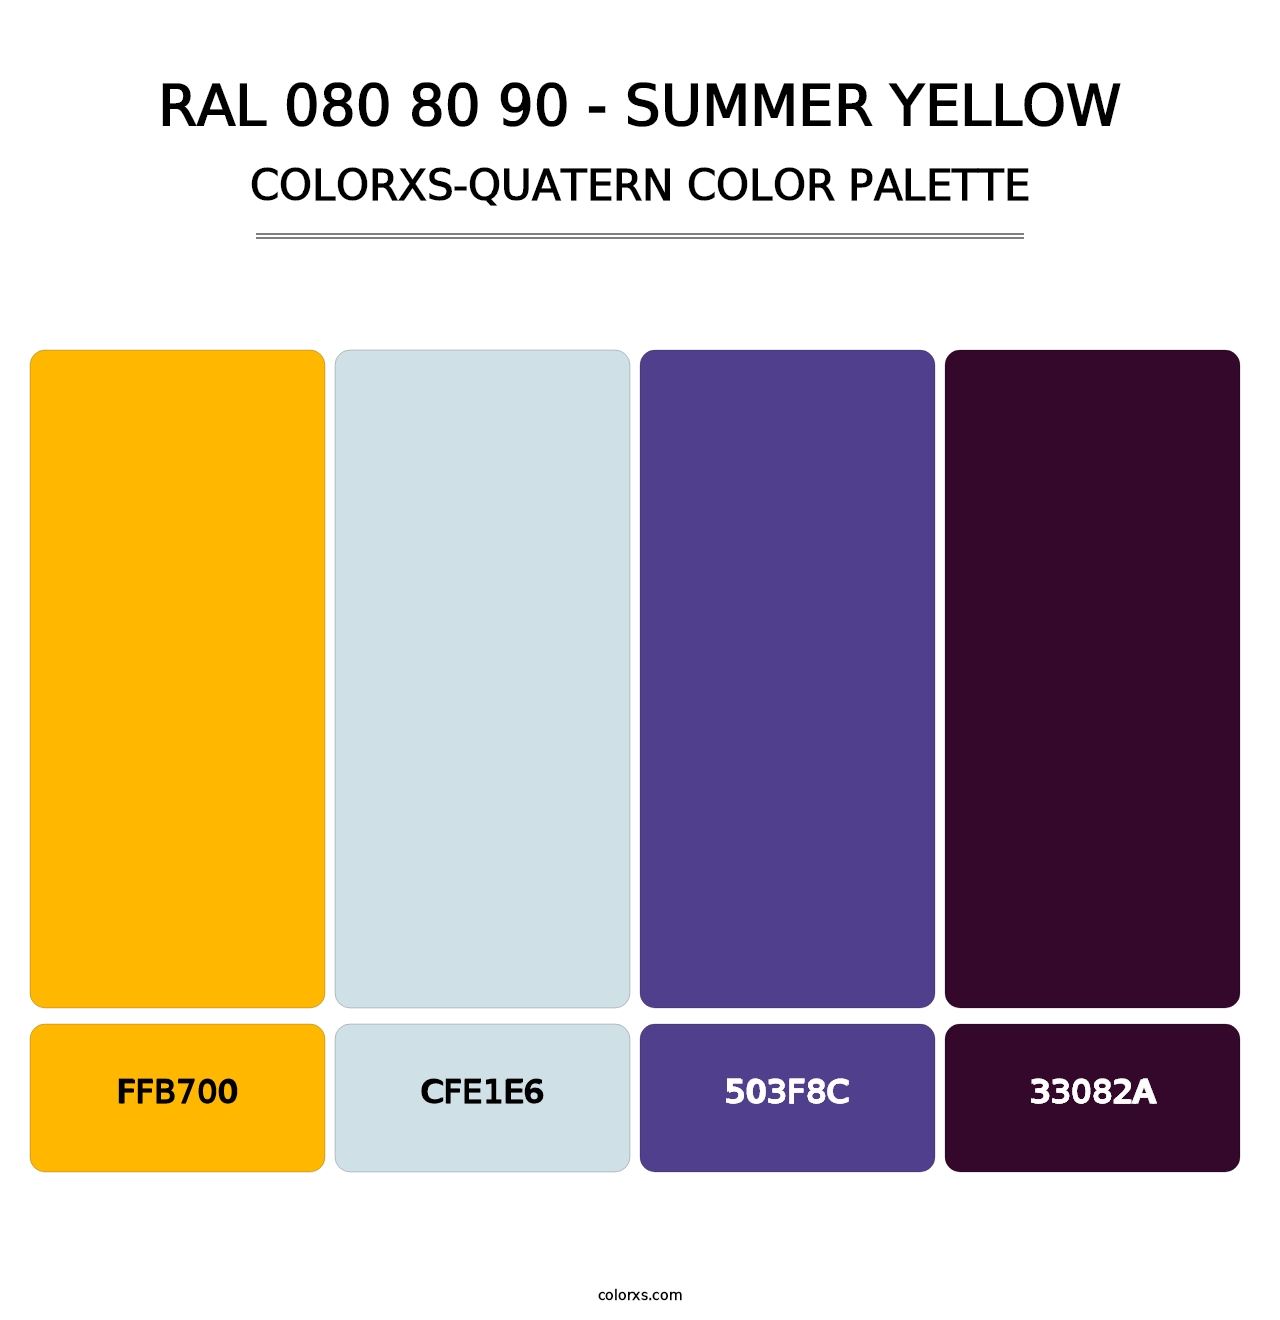 RAL 080 80 90 - Summer Yellow - Colorxs Quatern Palette